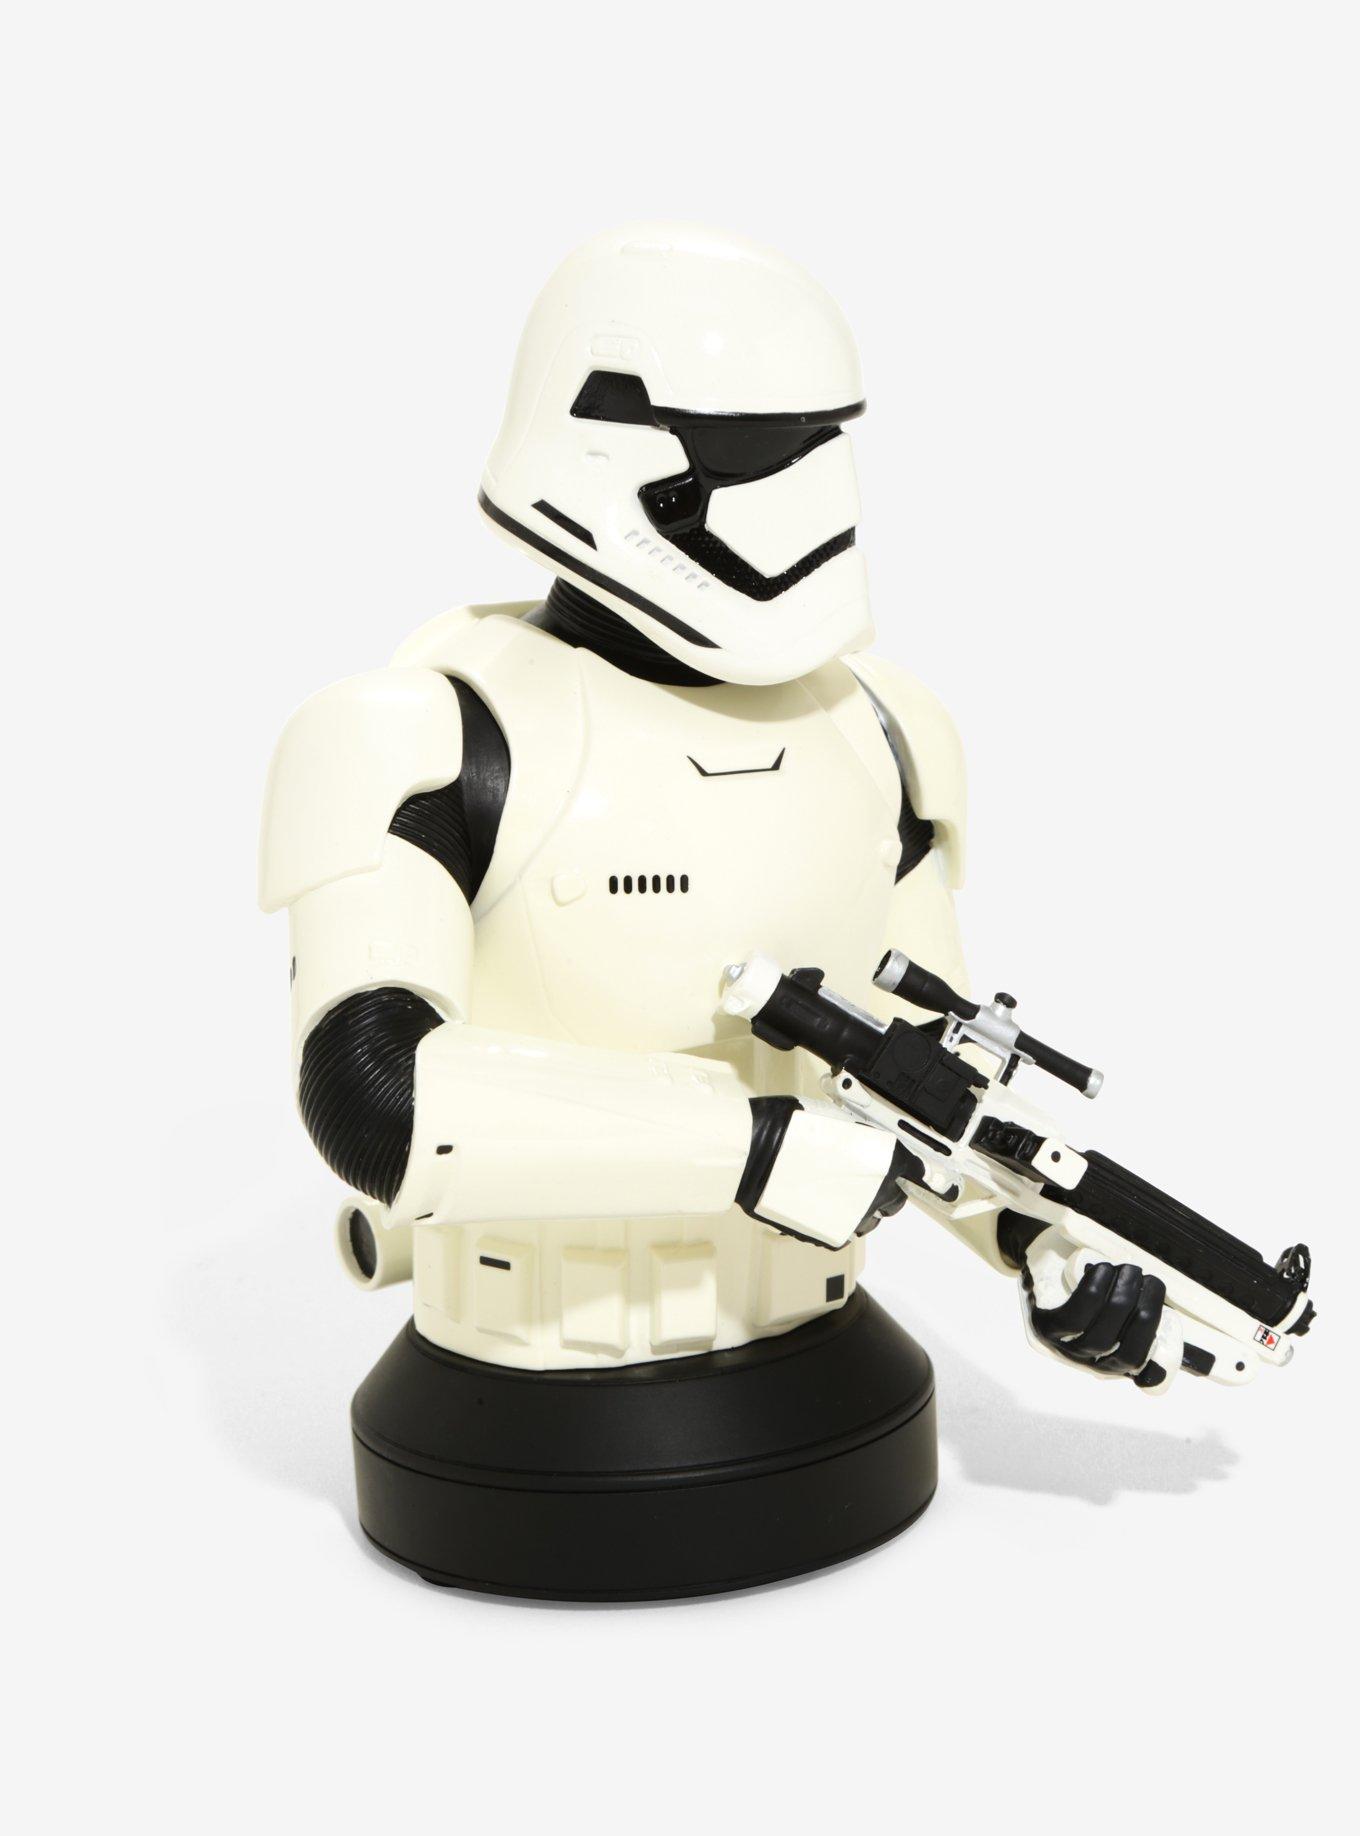 Star Wars First Order Stormtrooper Collectible Mini Bust, , alternate